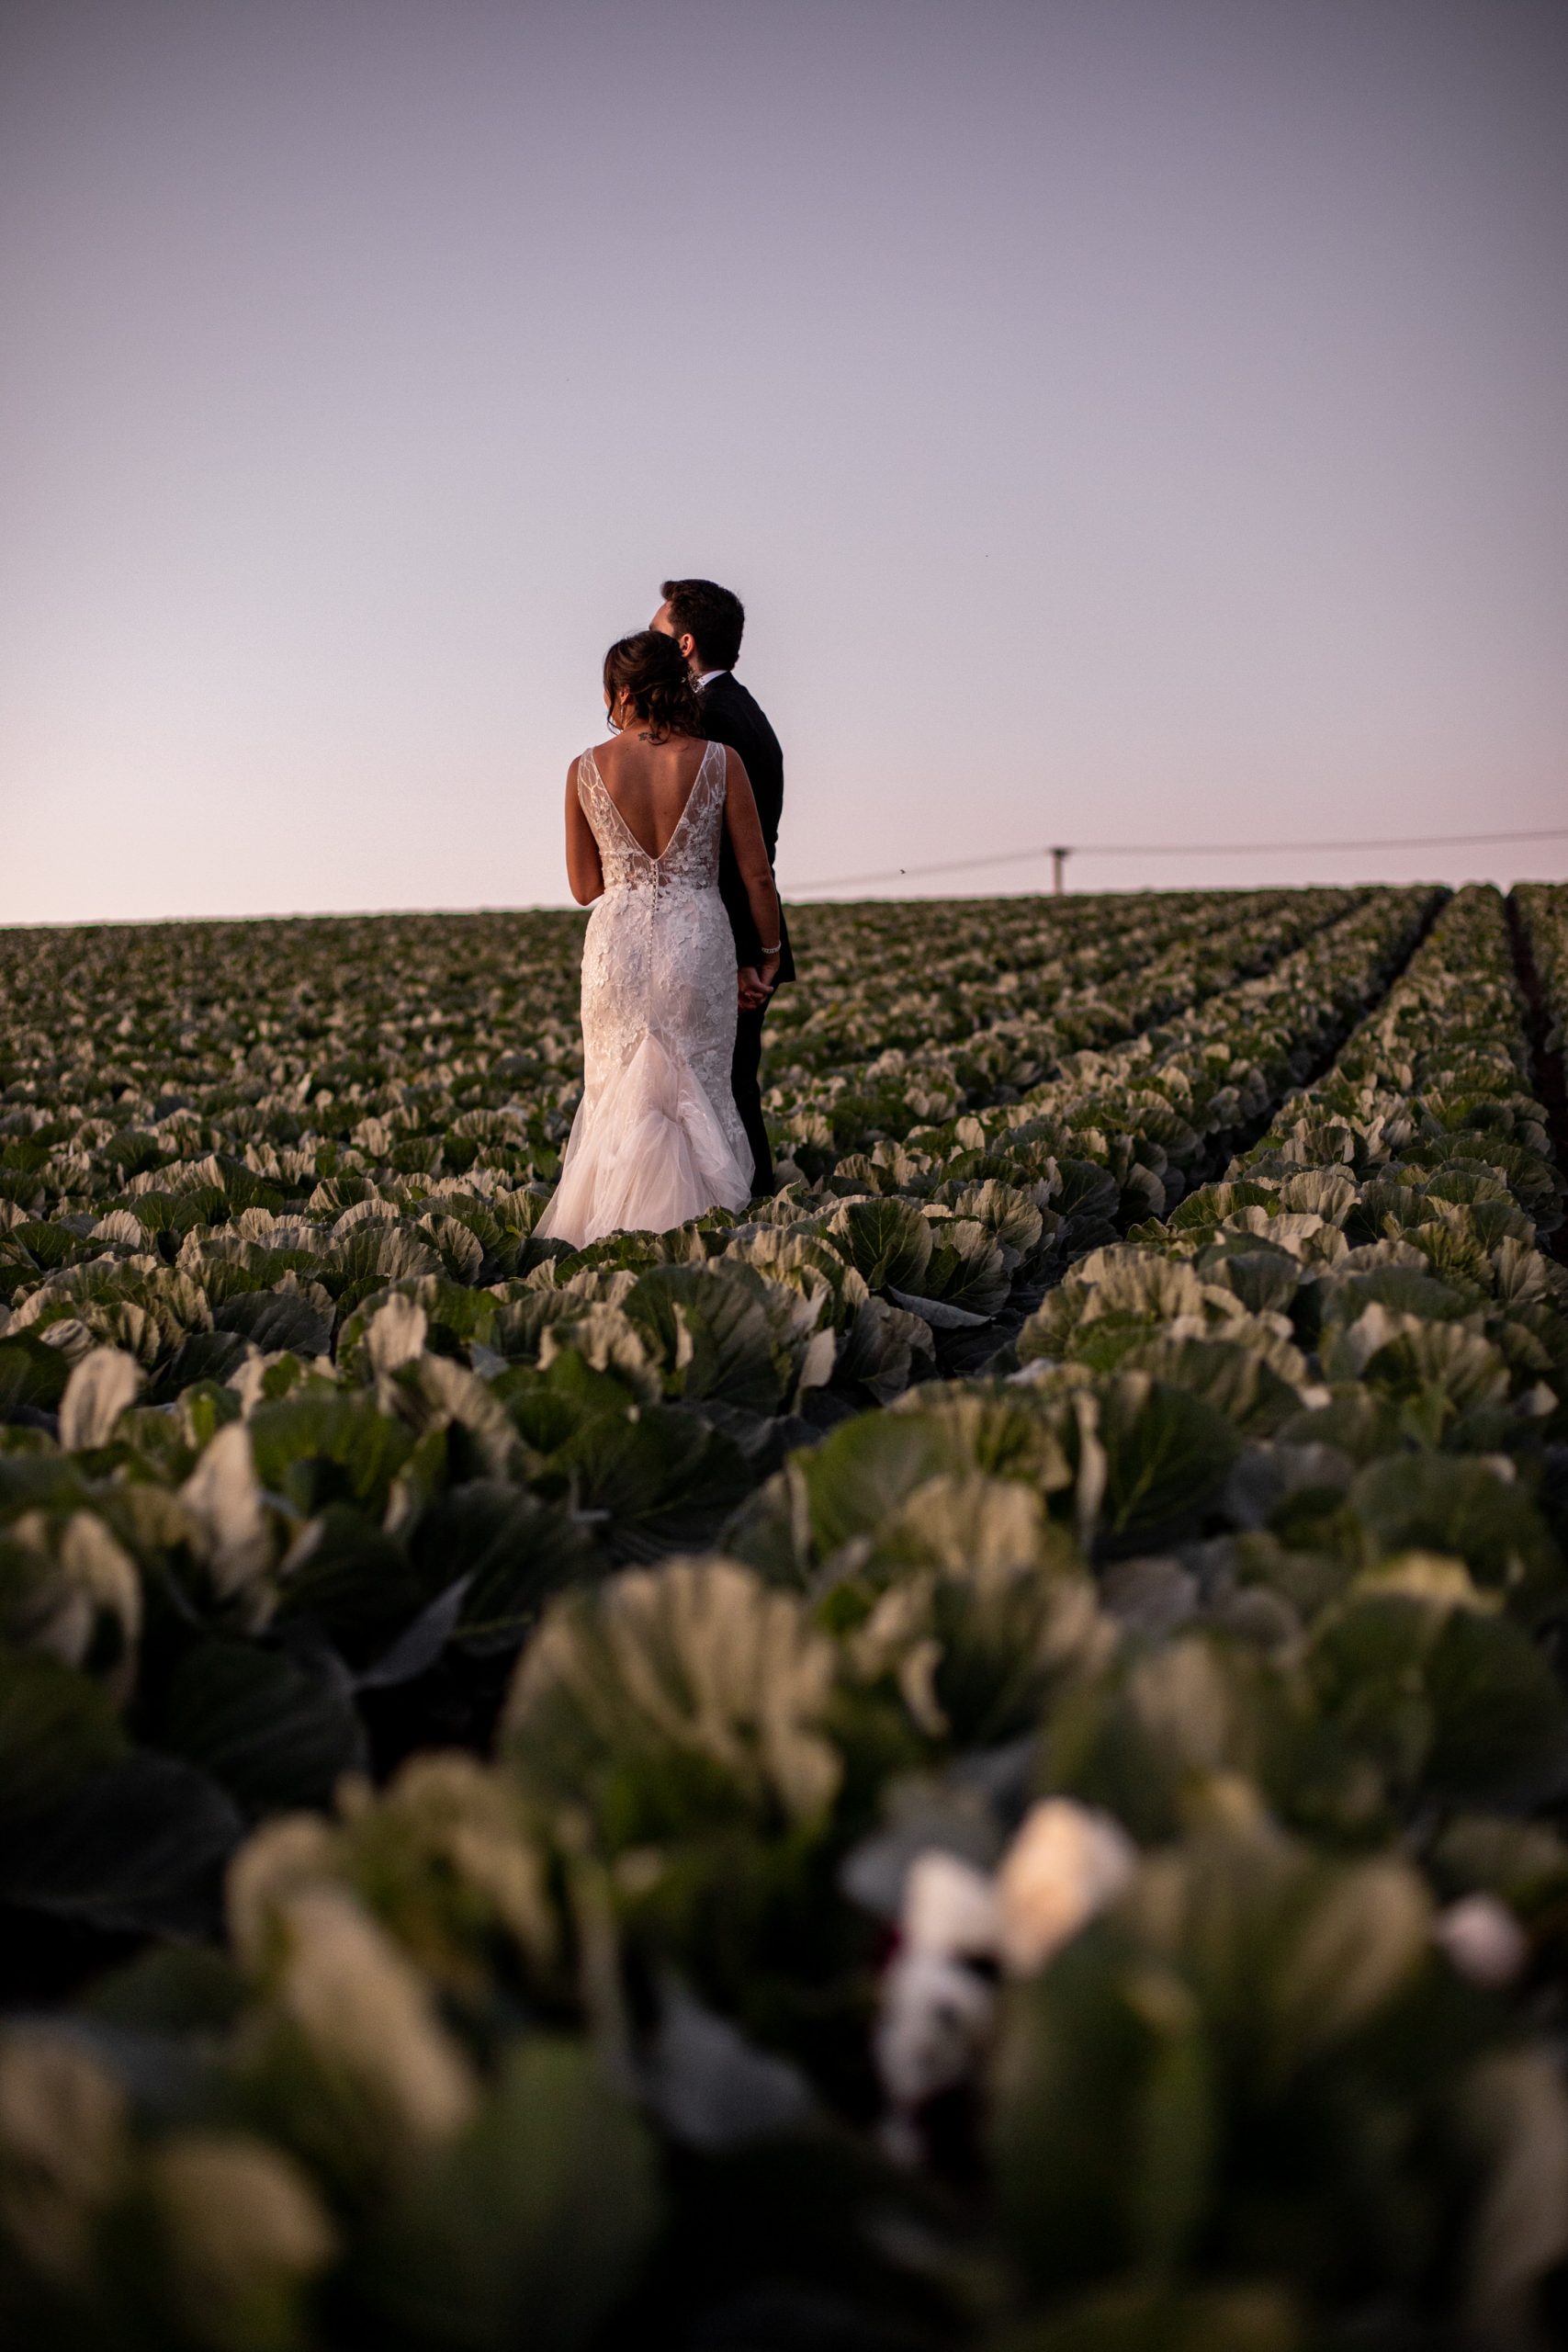 Bride and groom portraits at sunset.